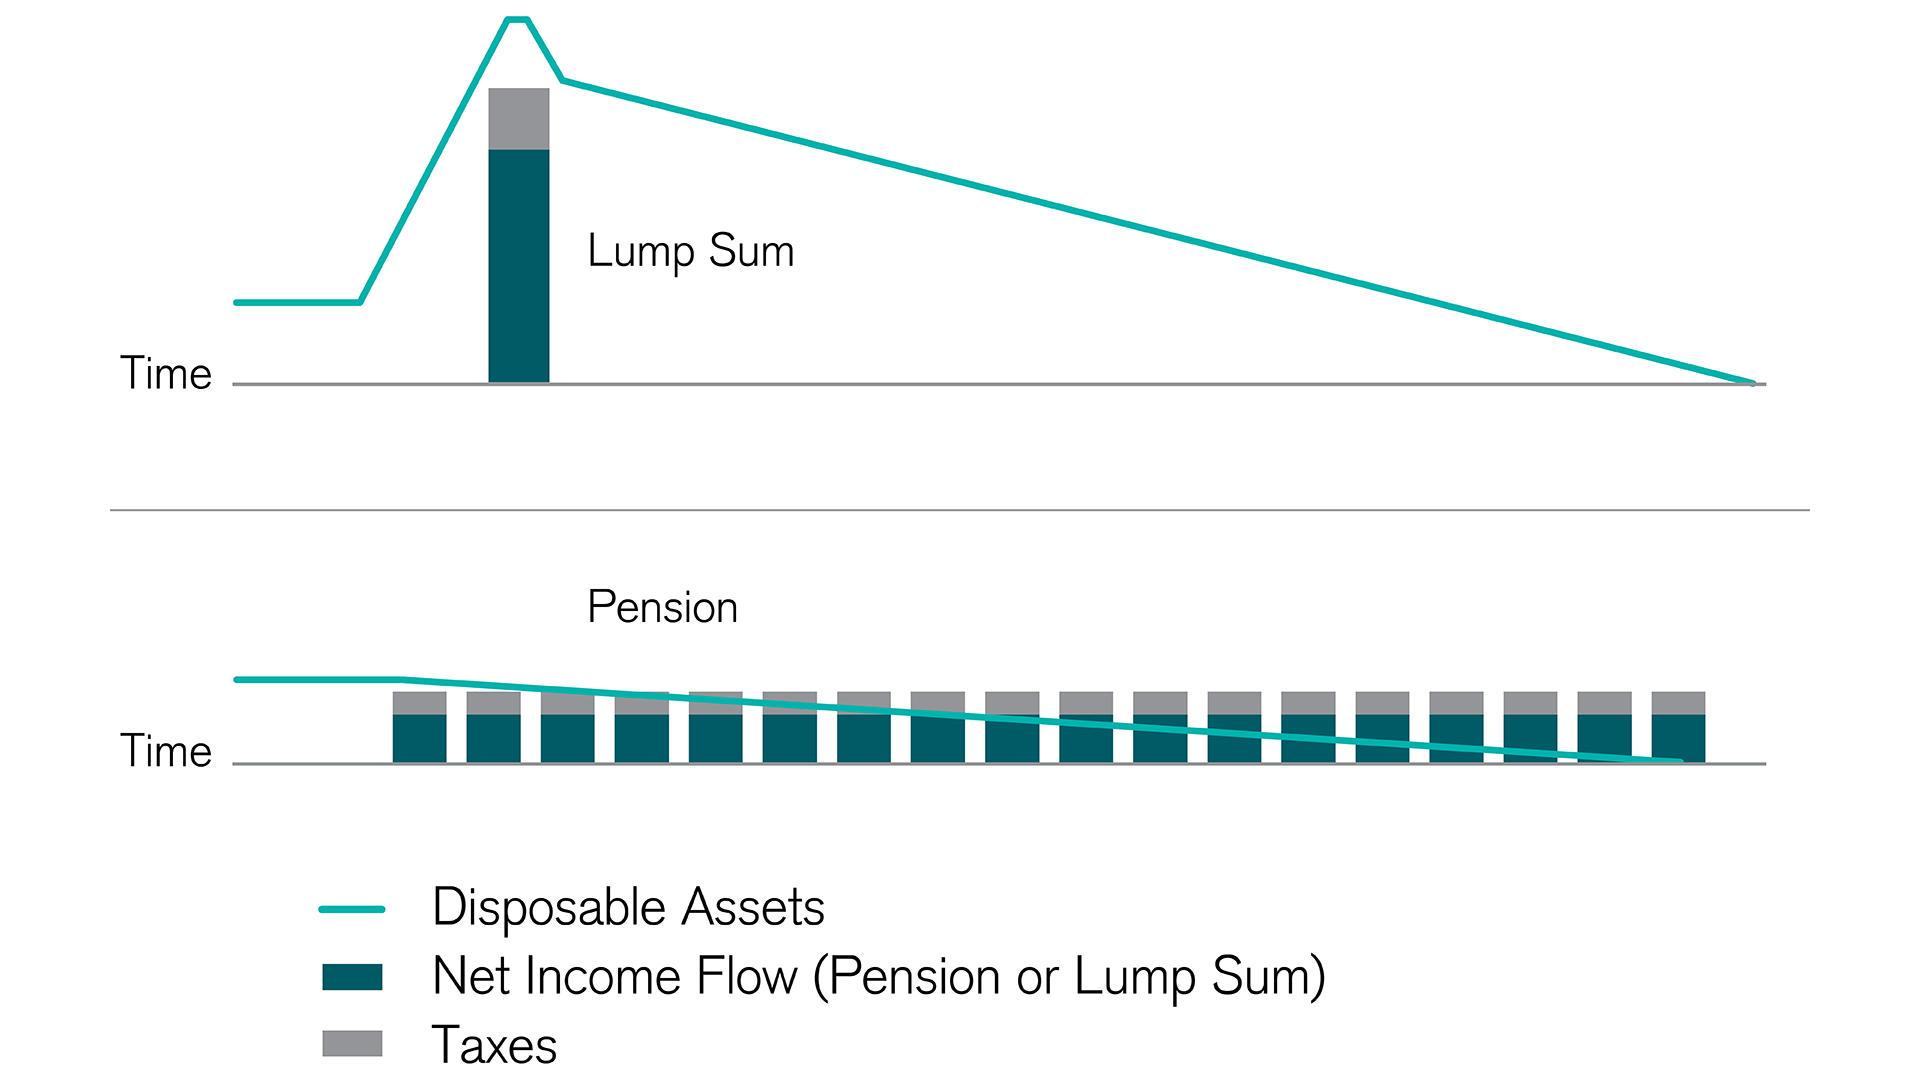 pension or lump sum the two options over time